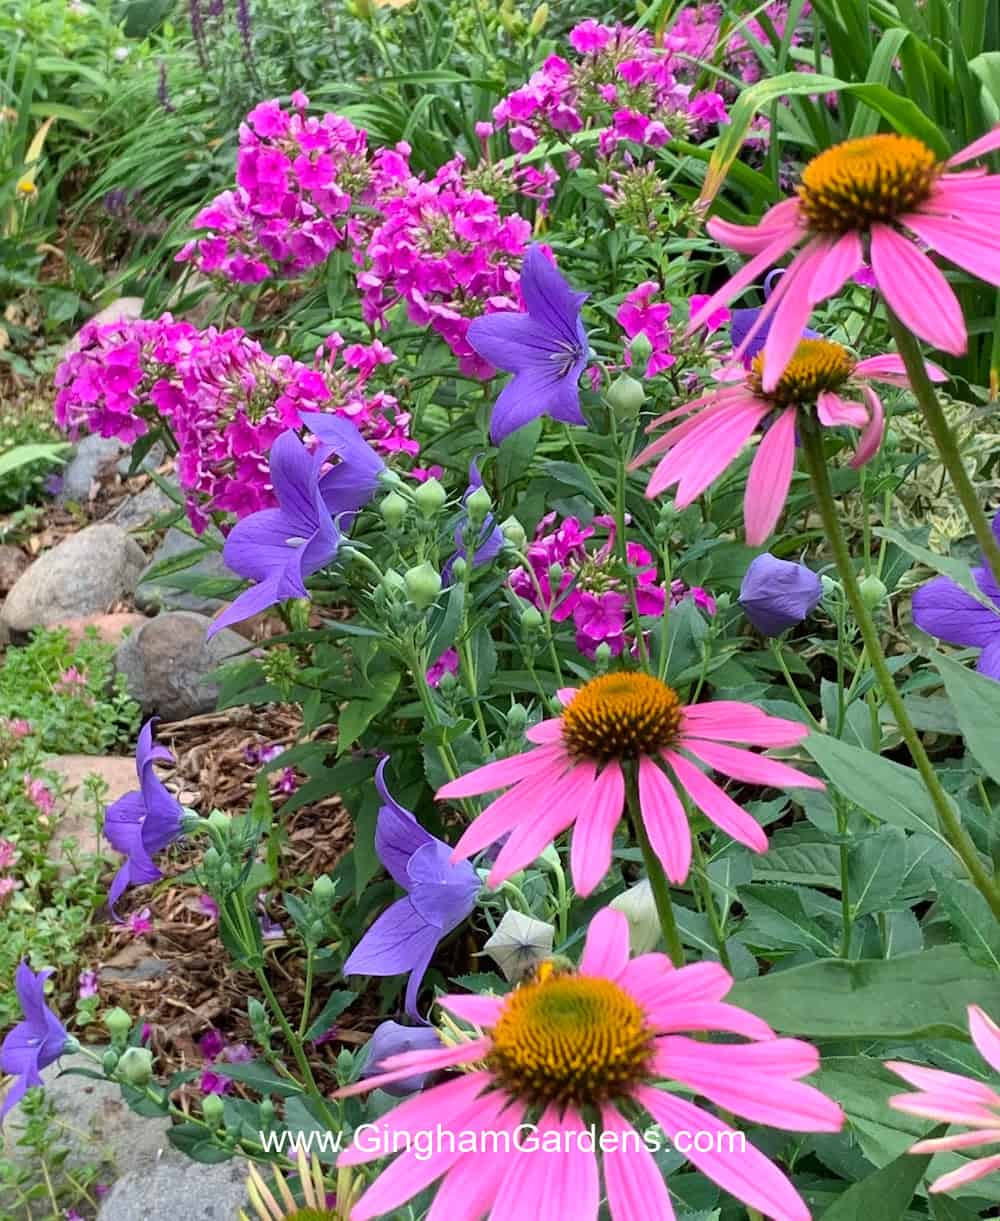 Coneflower, phlox and balloon flower in a flower garden demonstrating color combinations in a flower garden.